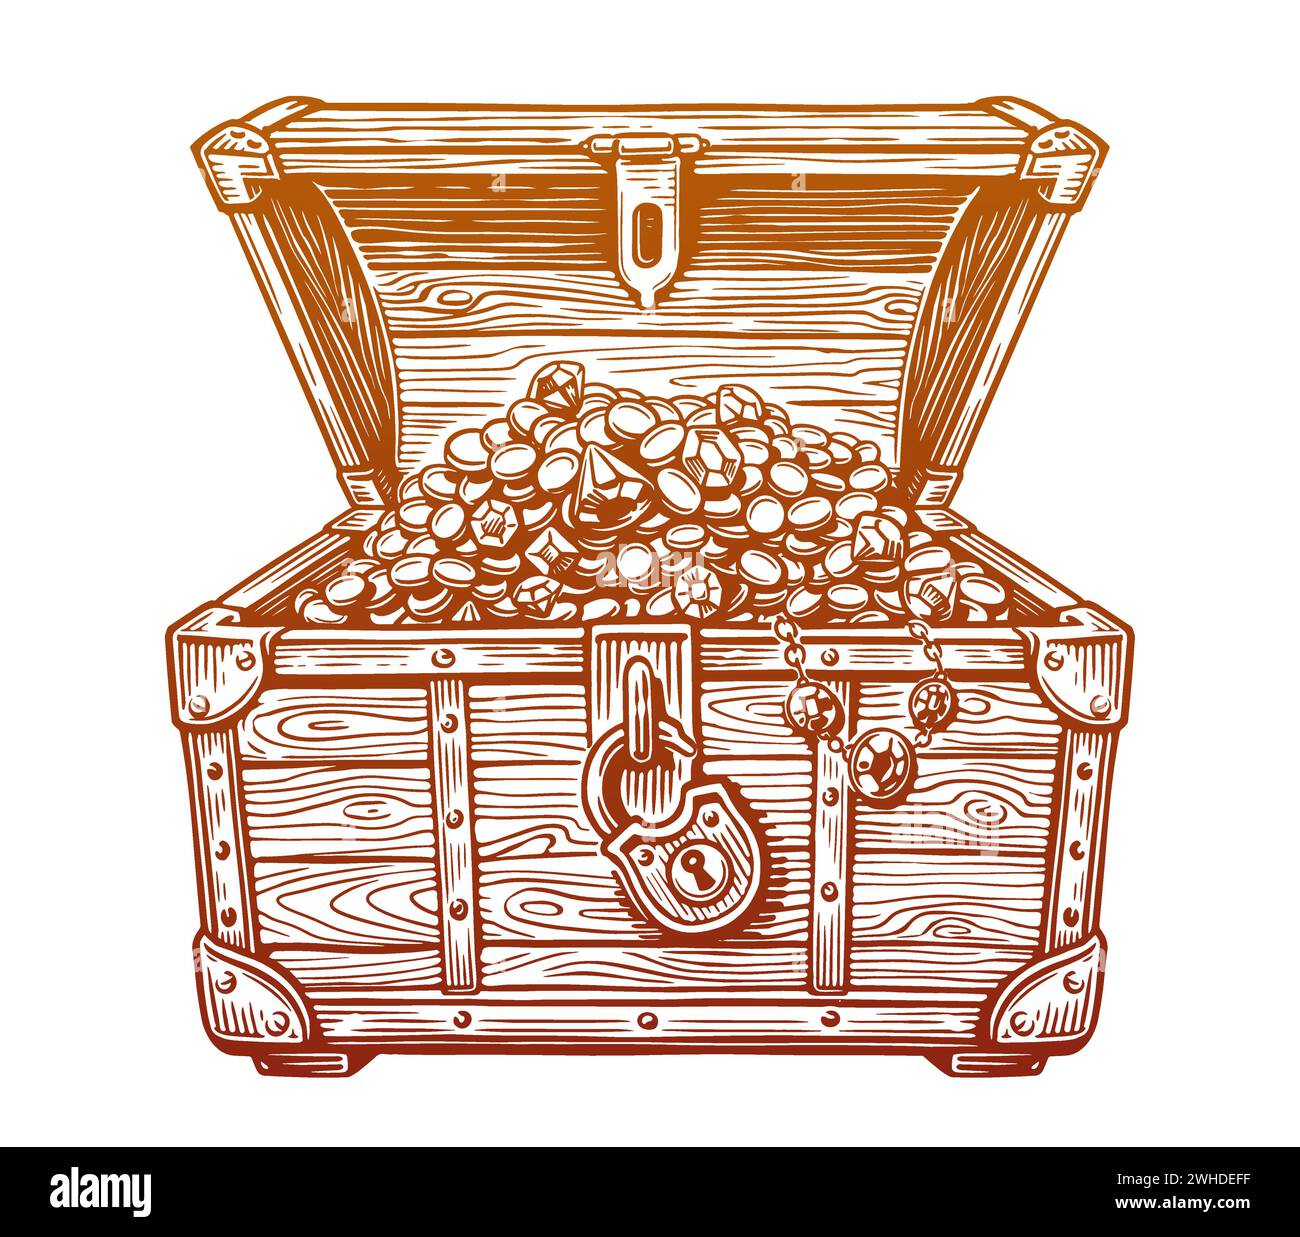 Open treasure chest filled with gold coins and jewelry. Vintage sketch vector illustration Stock Vector